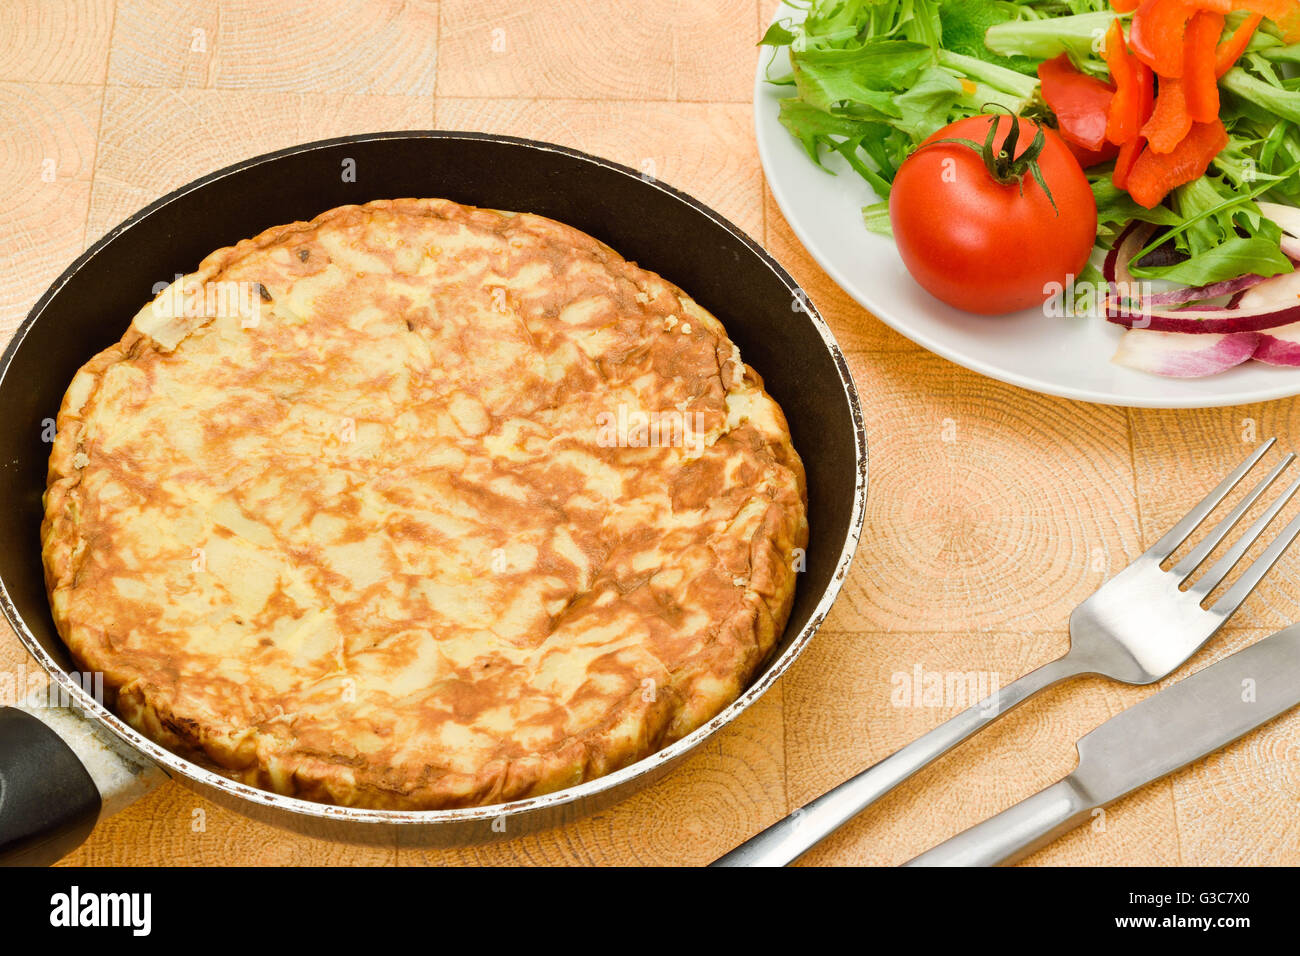 A Spanish omelette or tortilla served with a tomato and green salad Stock Photo